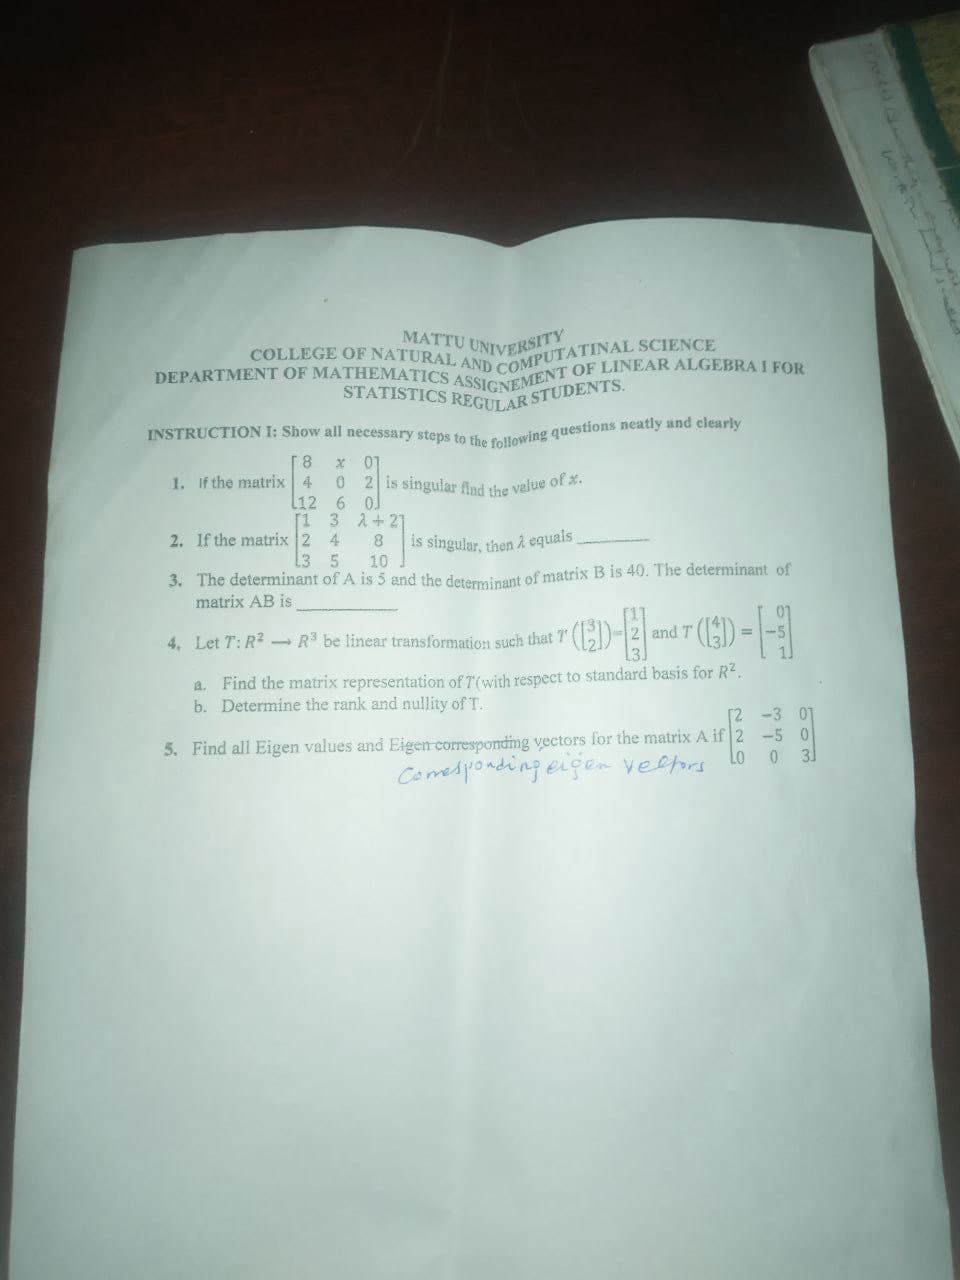 MATTU UNIVERSITY
COLLEGE OF NATURAL AND COMPUTATINAL SCIENCE
DEPARTMENT OF MATHEMATICS ASSIGNEMENT OF LINEAR ALGEBRA I FOR
STATISTICS REGULAR STUDENTS.
INSTRUCTION I: Show all necessary steps to the following questions neatly and clearly
8 X 07
1. If the matrix 4
0 2 is singular find the value of x.
L12 6 0.
[1 3
4
2. If the matrix 2
2+21
8
is singular, then à equals
3 5
10
3. The determinant of A is 5 and the determinant of matrix B is 40. The determinant of
matrix AB is
---
and T
=
4. Let T: R² R³ be linear transformation such that 7
a. Find the matrix representation of T(with respect to standard basis for R².
b. Determine the rank and nullity of T.
[2 -3 01
5. Find all Eigen values and Eigen corresponding vectors for the matrix A if 2 -5 0
Lo 0 31
Comesponding eigen velfors